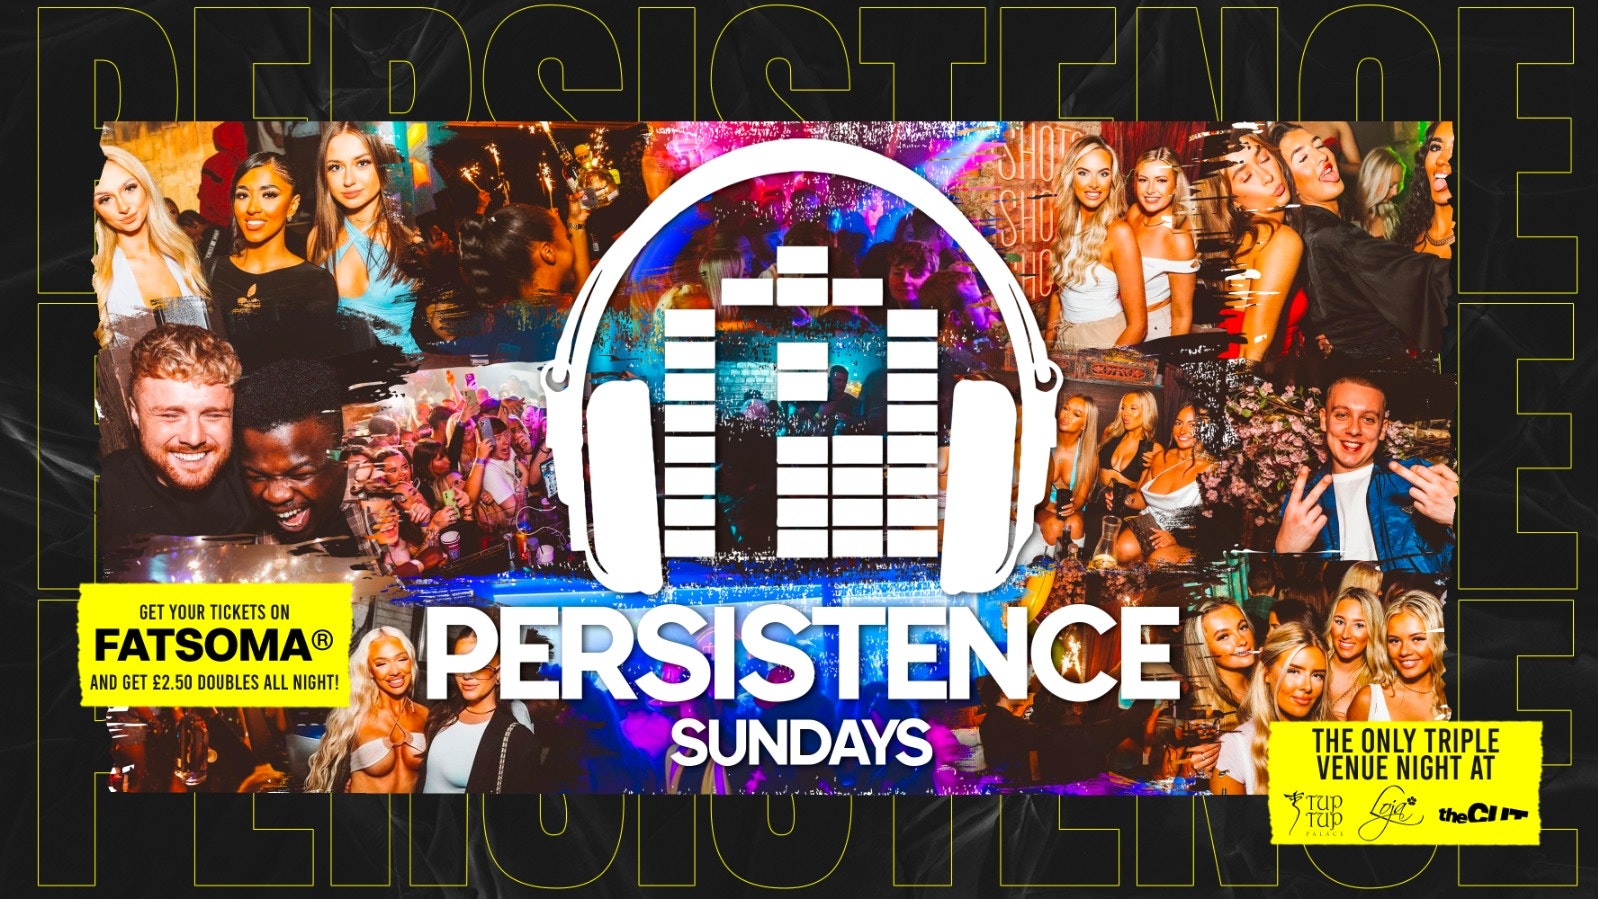 PERSISTENCE | £2.50 DOUBLES WITH A TICKET! | TUP TUP PALACE, LOJA & THE CUT | 23rd APRIL